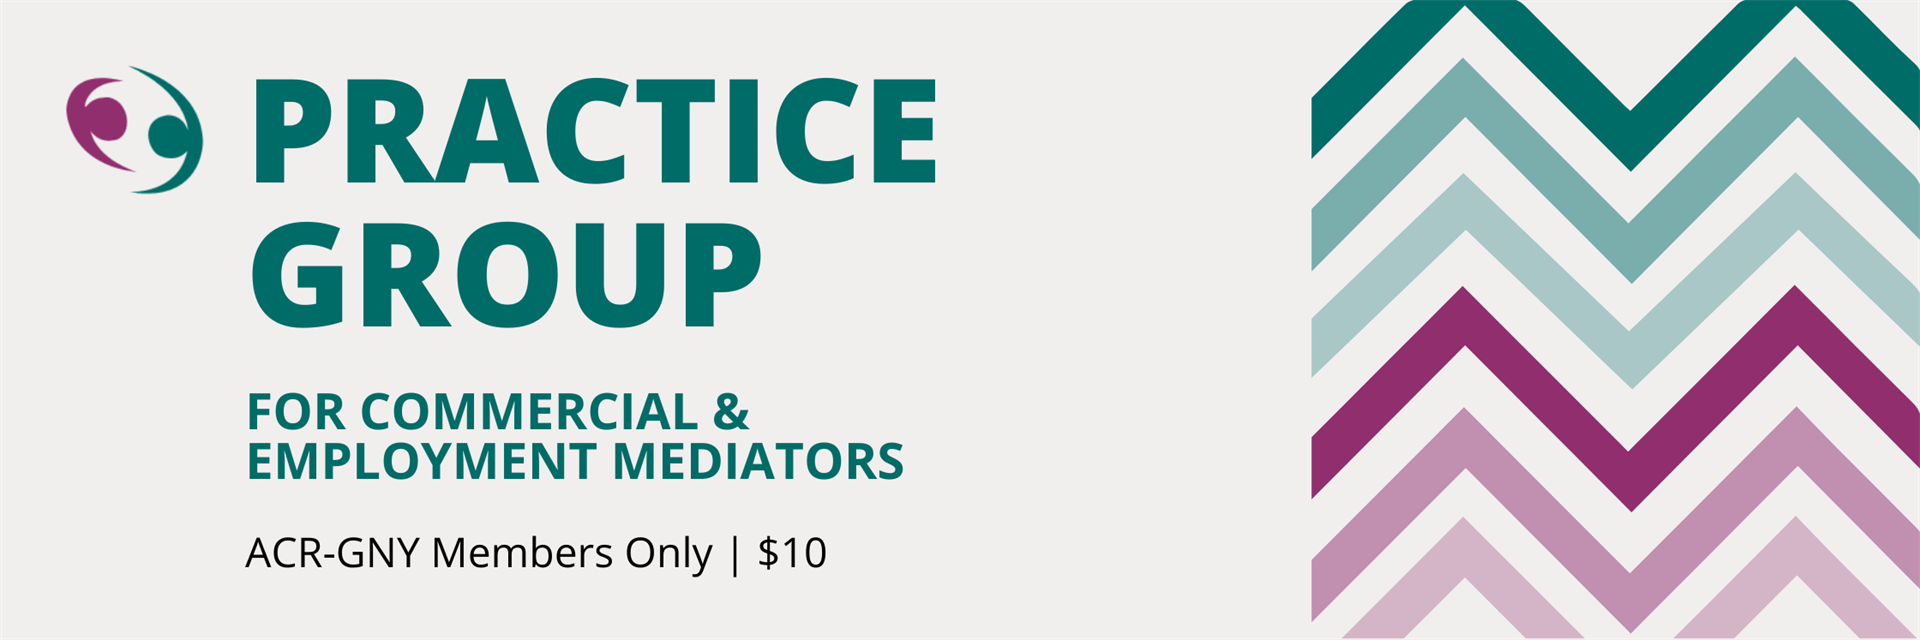 Practice Group for Commercial & Employment Mediators (ACR-GNY Members Only - $10)